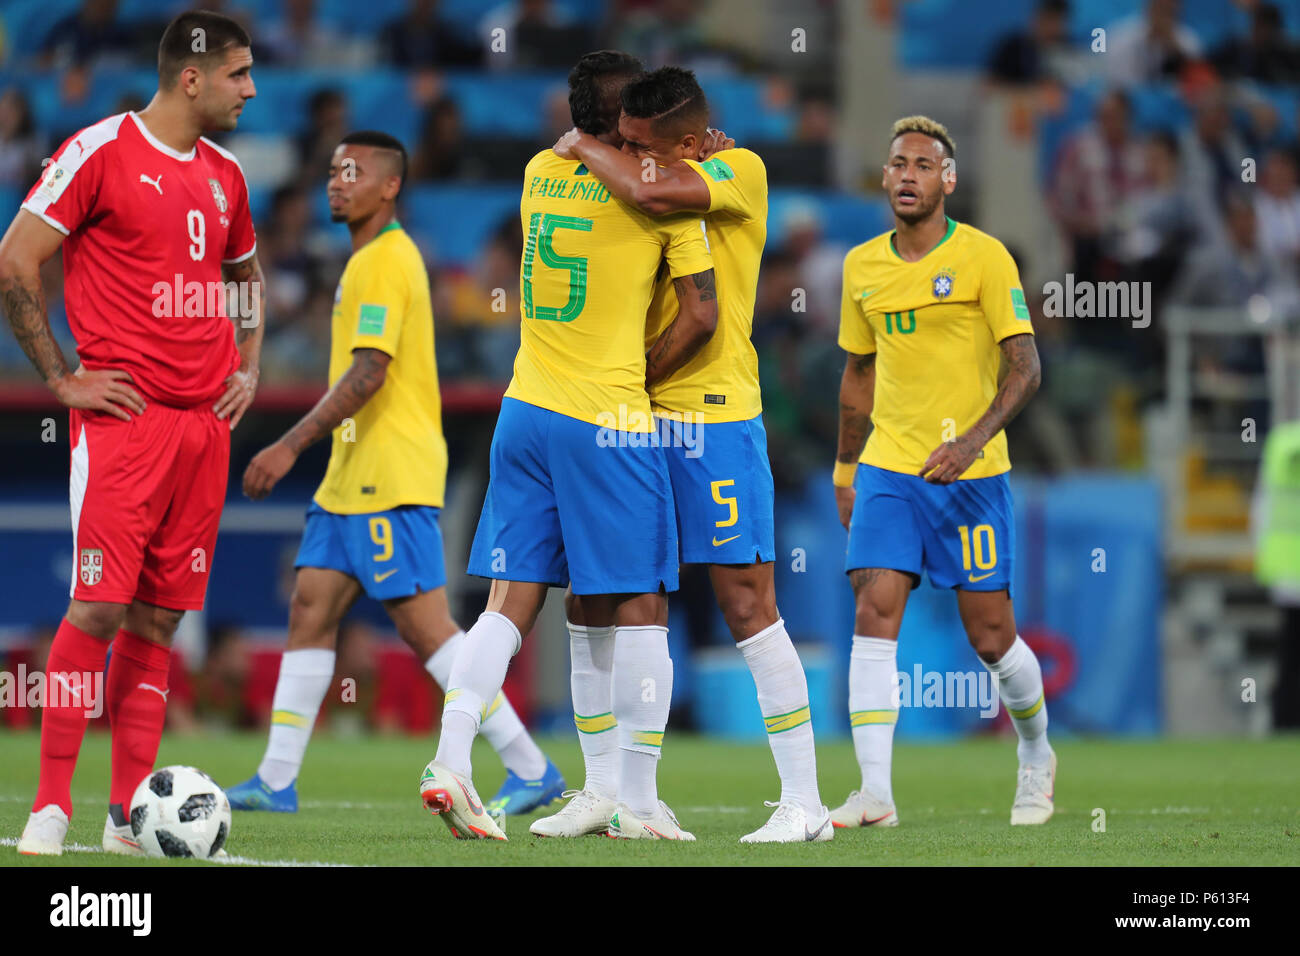 Aleksandar Mitrovic, Gabriel Jesus, Paulinho, Casimiro, Neymar SERBIA V BRAZIL SERBIA V BRAZIL, 2018 FIFA WORLD CUP RUSSIA 27 June 2018 GBC8911 2018 FIFA World Cup Russia Spartak Stadium Moscow STRICTLY EDITORIAL USE ONLY. If The Player/Players Depicted In This Image Is/Are Playing For An English Club Or The England National Team. Then This Image May Only Be Used For Editorial Purposes. No Commercial Use. The Following Usages Are Also Restricted EVEN IF IN AN EDITORIAL CONTEXT: Use in conjuction with, or part of, any unauthorized audio, video, data, fixture lists, club/league Stock Photo